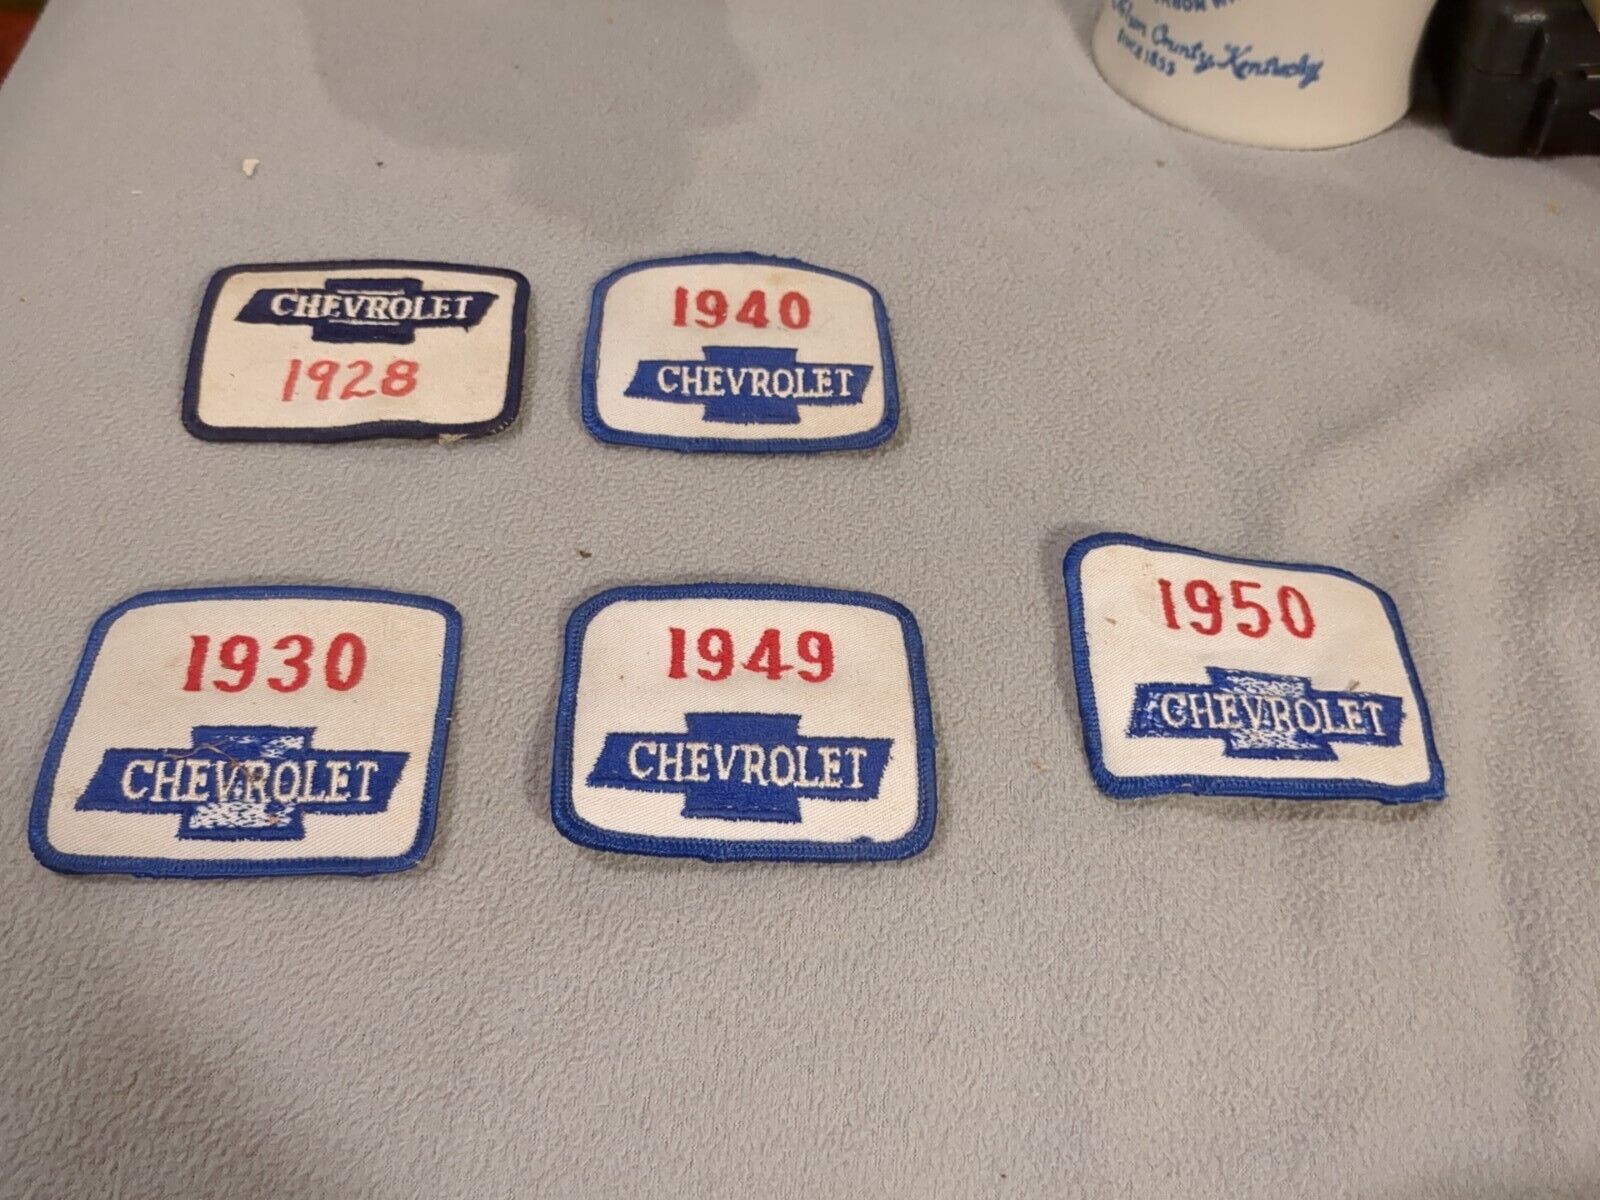 Lot Of 5 Vintage Chevrolet Patch 1928, 1930, 1940, 1949, 1950 Chevy Patches